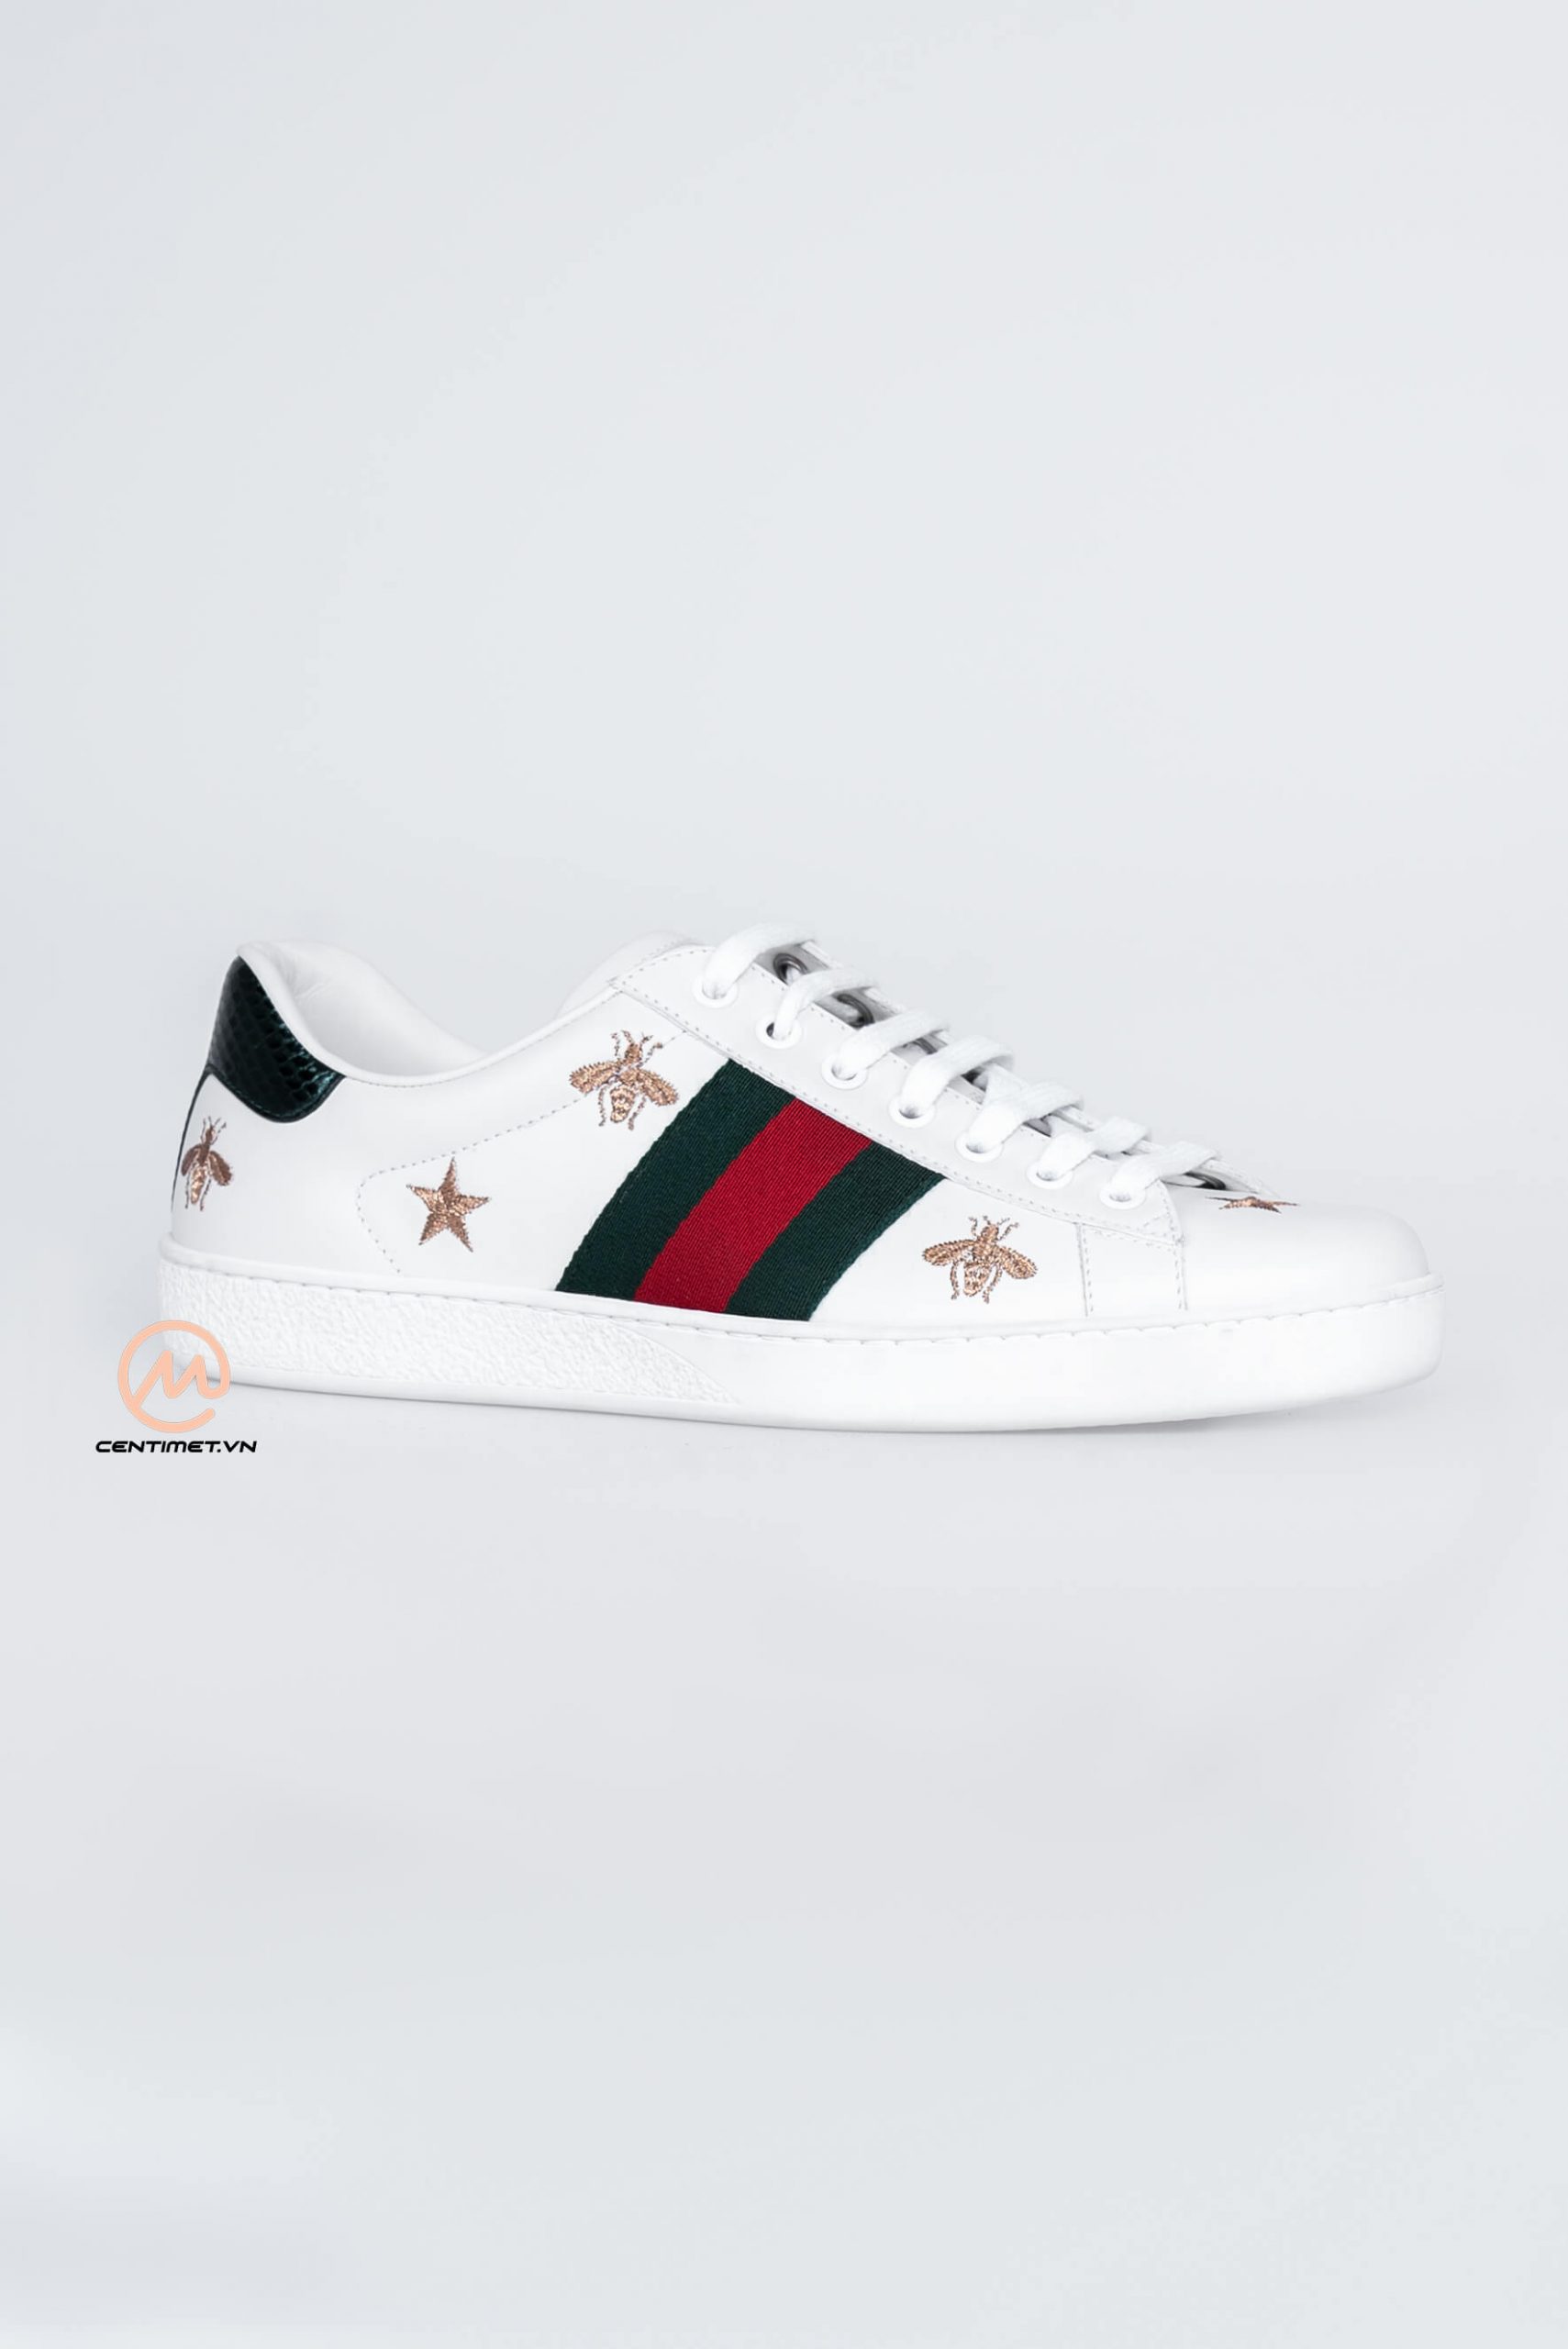 Giày Gucci Ace Sneaker with Bees & Stars - Centimet.vn